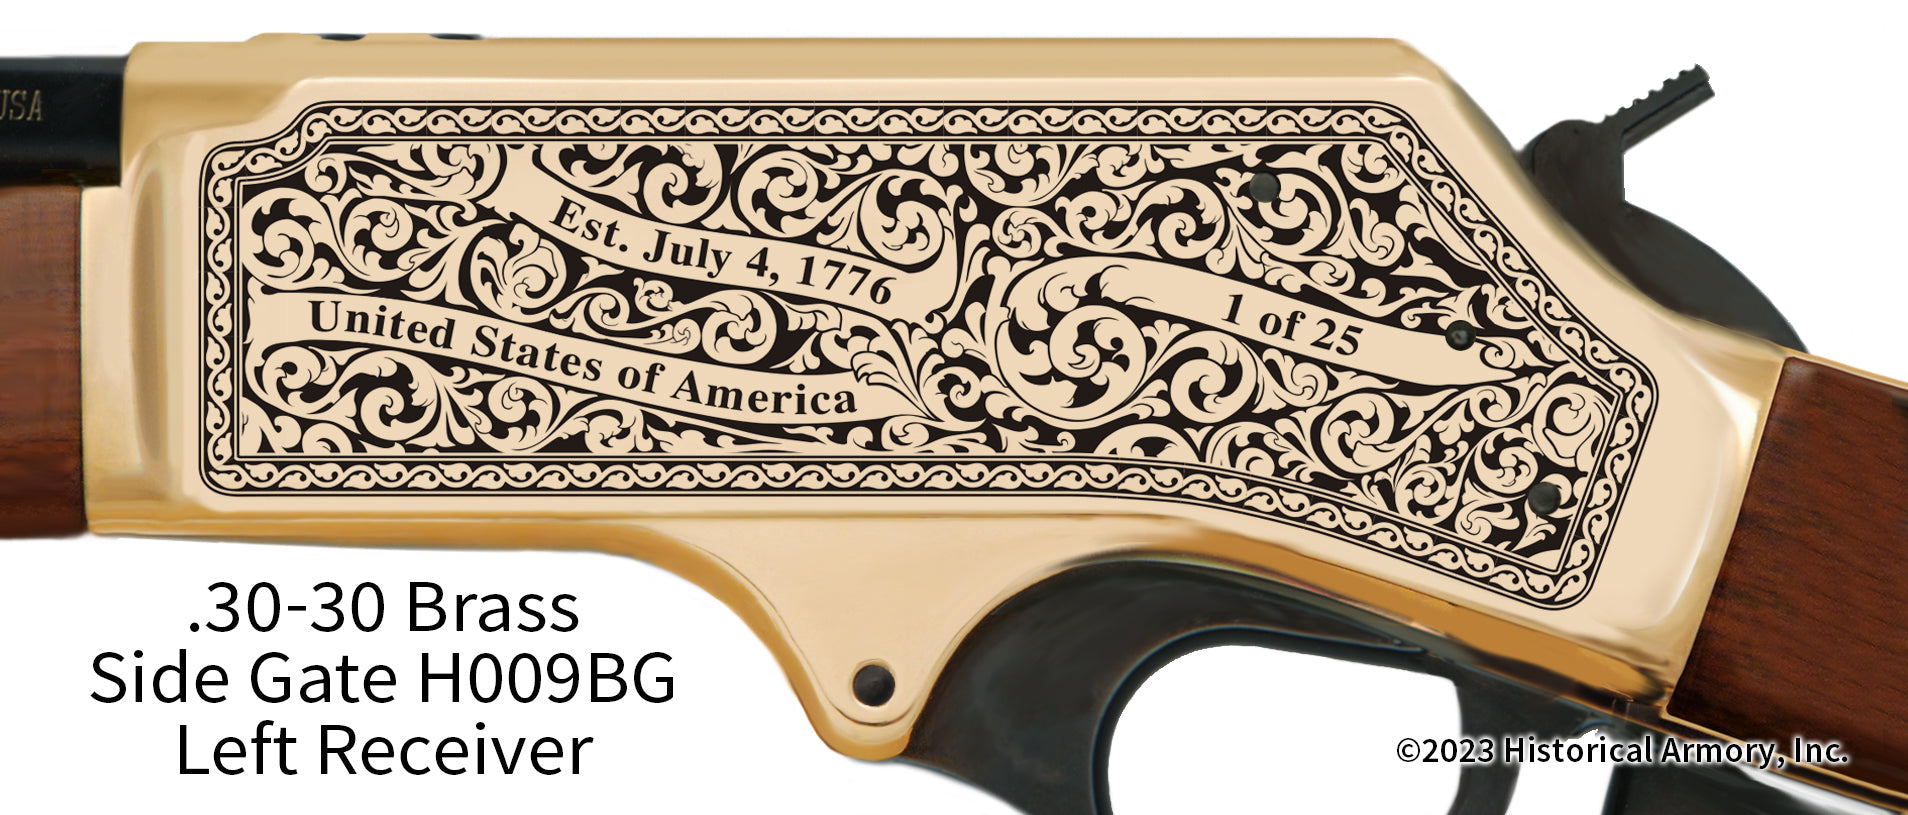 Tyler County West Virginia Engraved Henry .30-30 Brass Side Gate Rifle